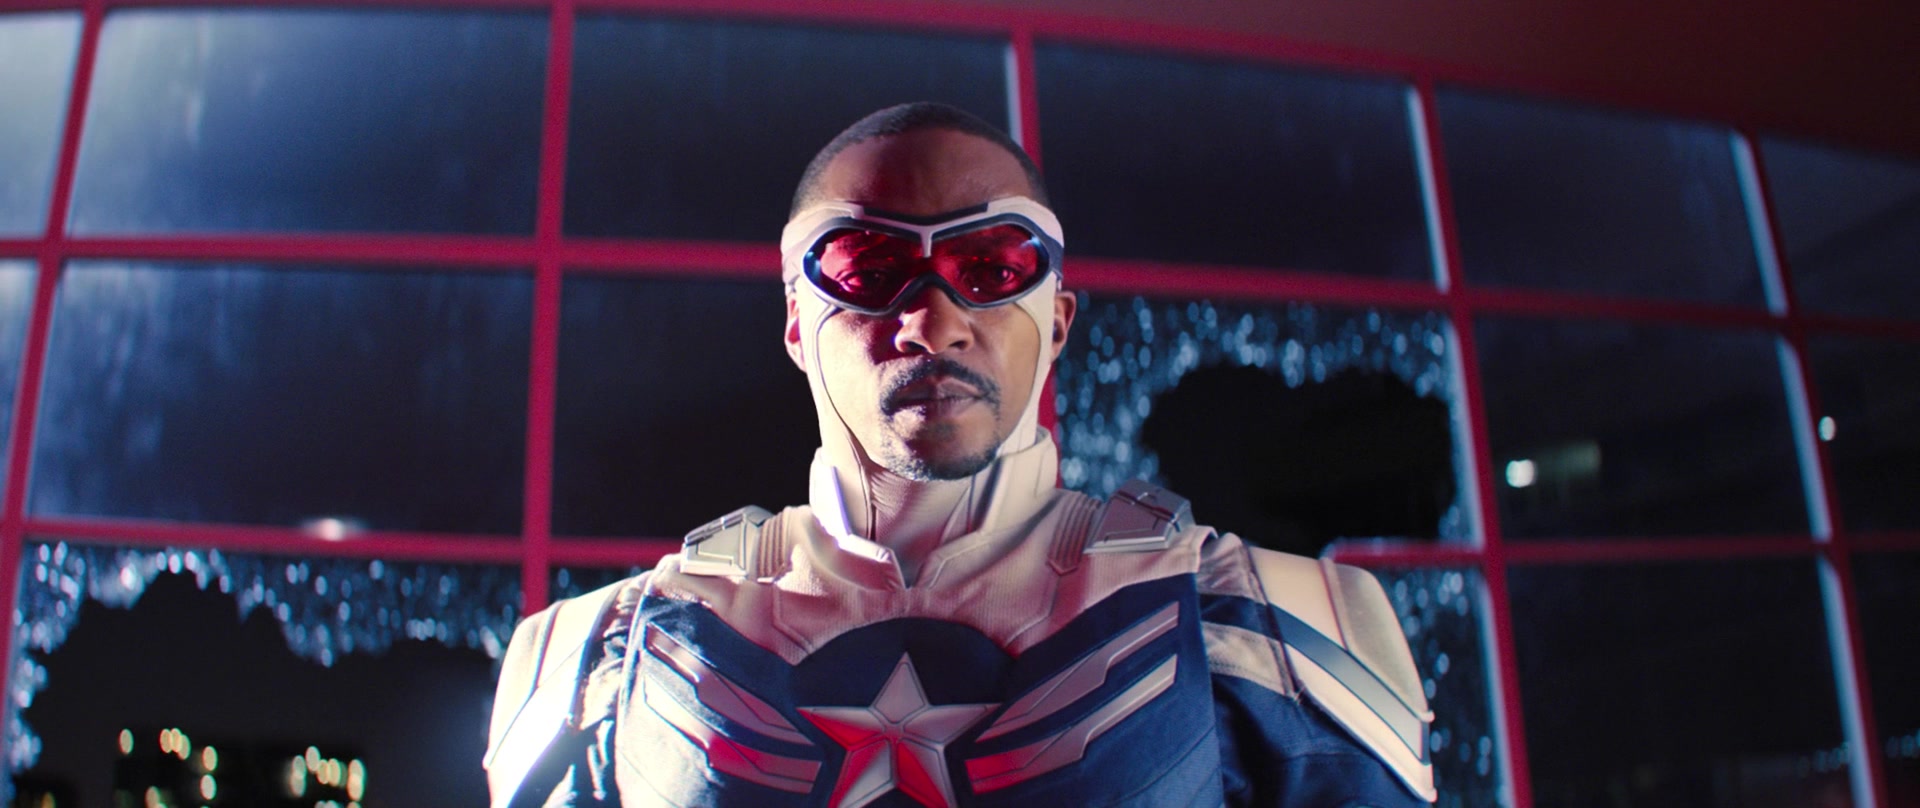 Sam Wilson (Anthony Mackie) makes one last desperate play to stop The Flag Smashers in The Falcon and the Winter Soldier Season 1 Episode 8 "One World, One People" (2023), Marvel Entertainment